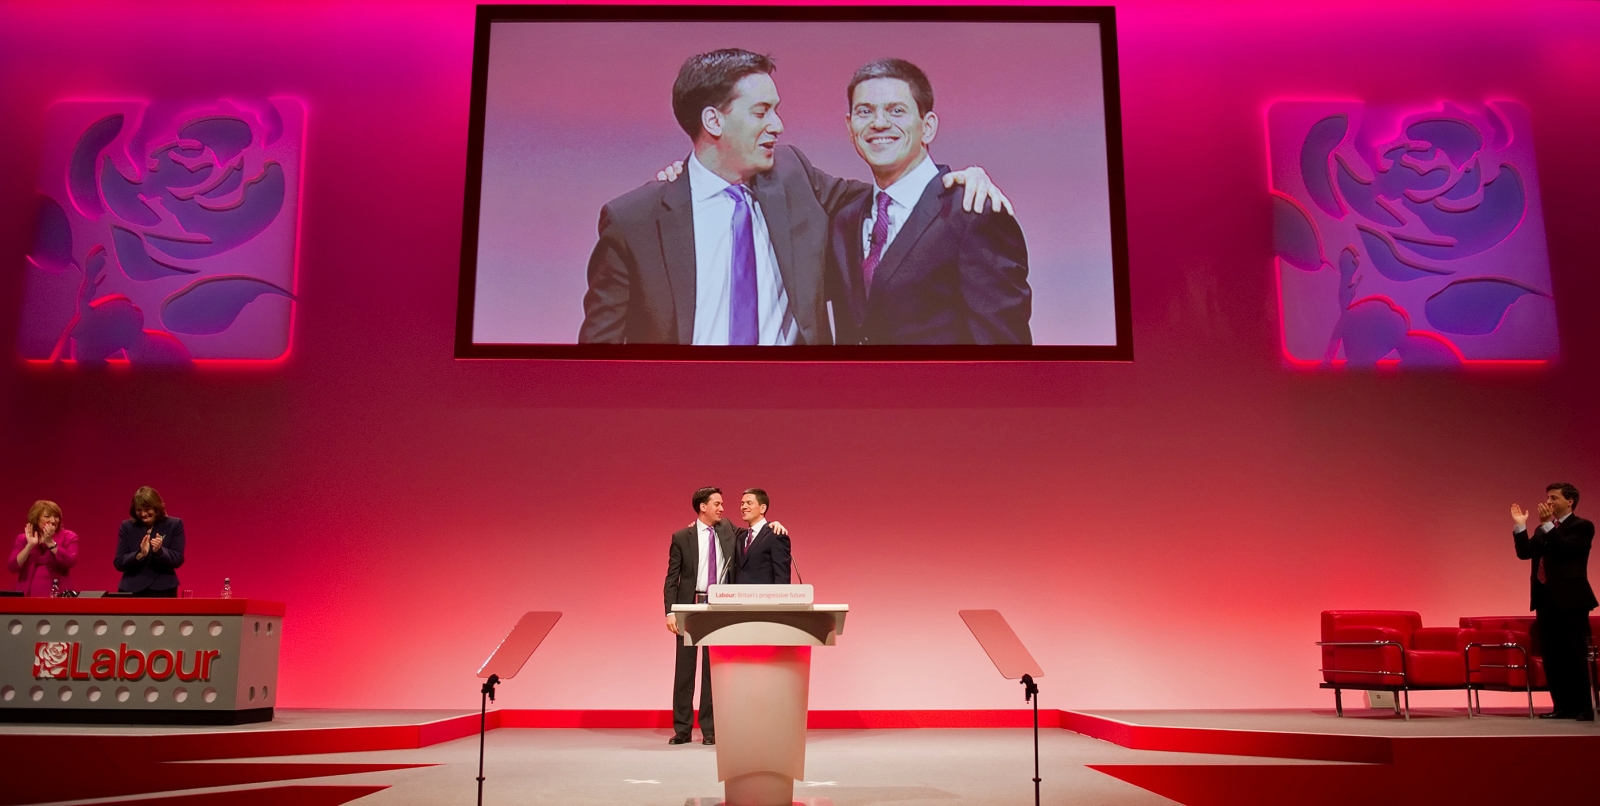 Ed and David Miliband face communication breakdown as radio interview is cut short